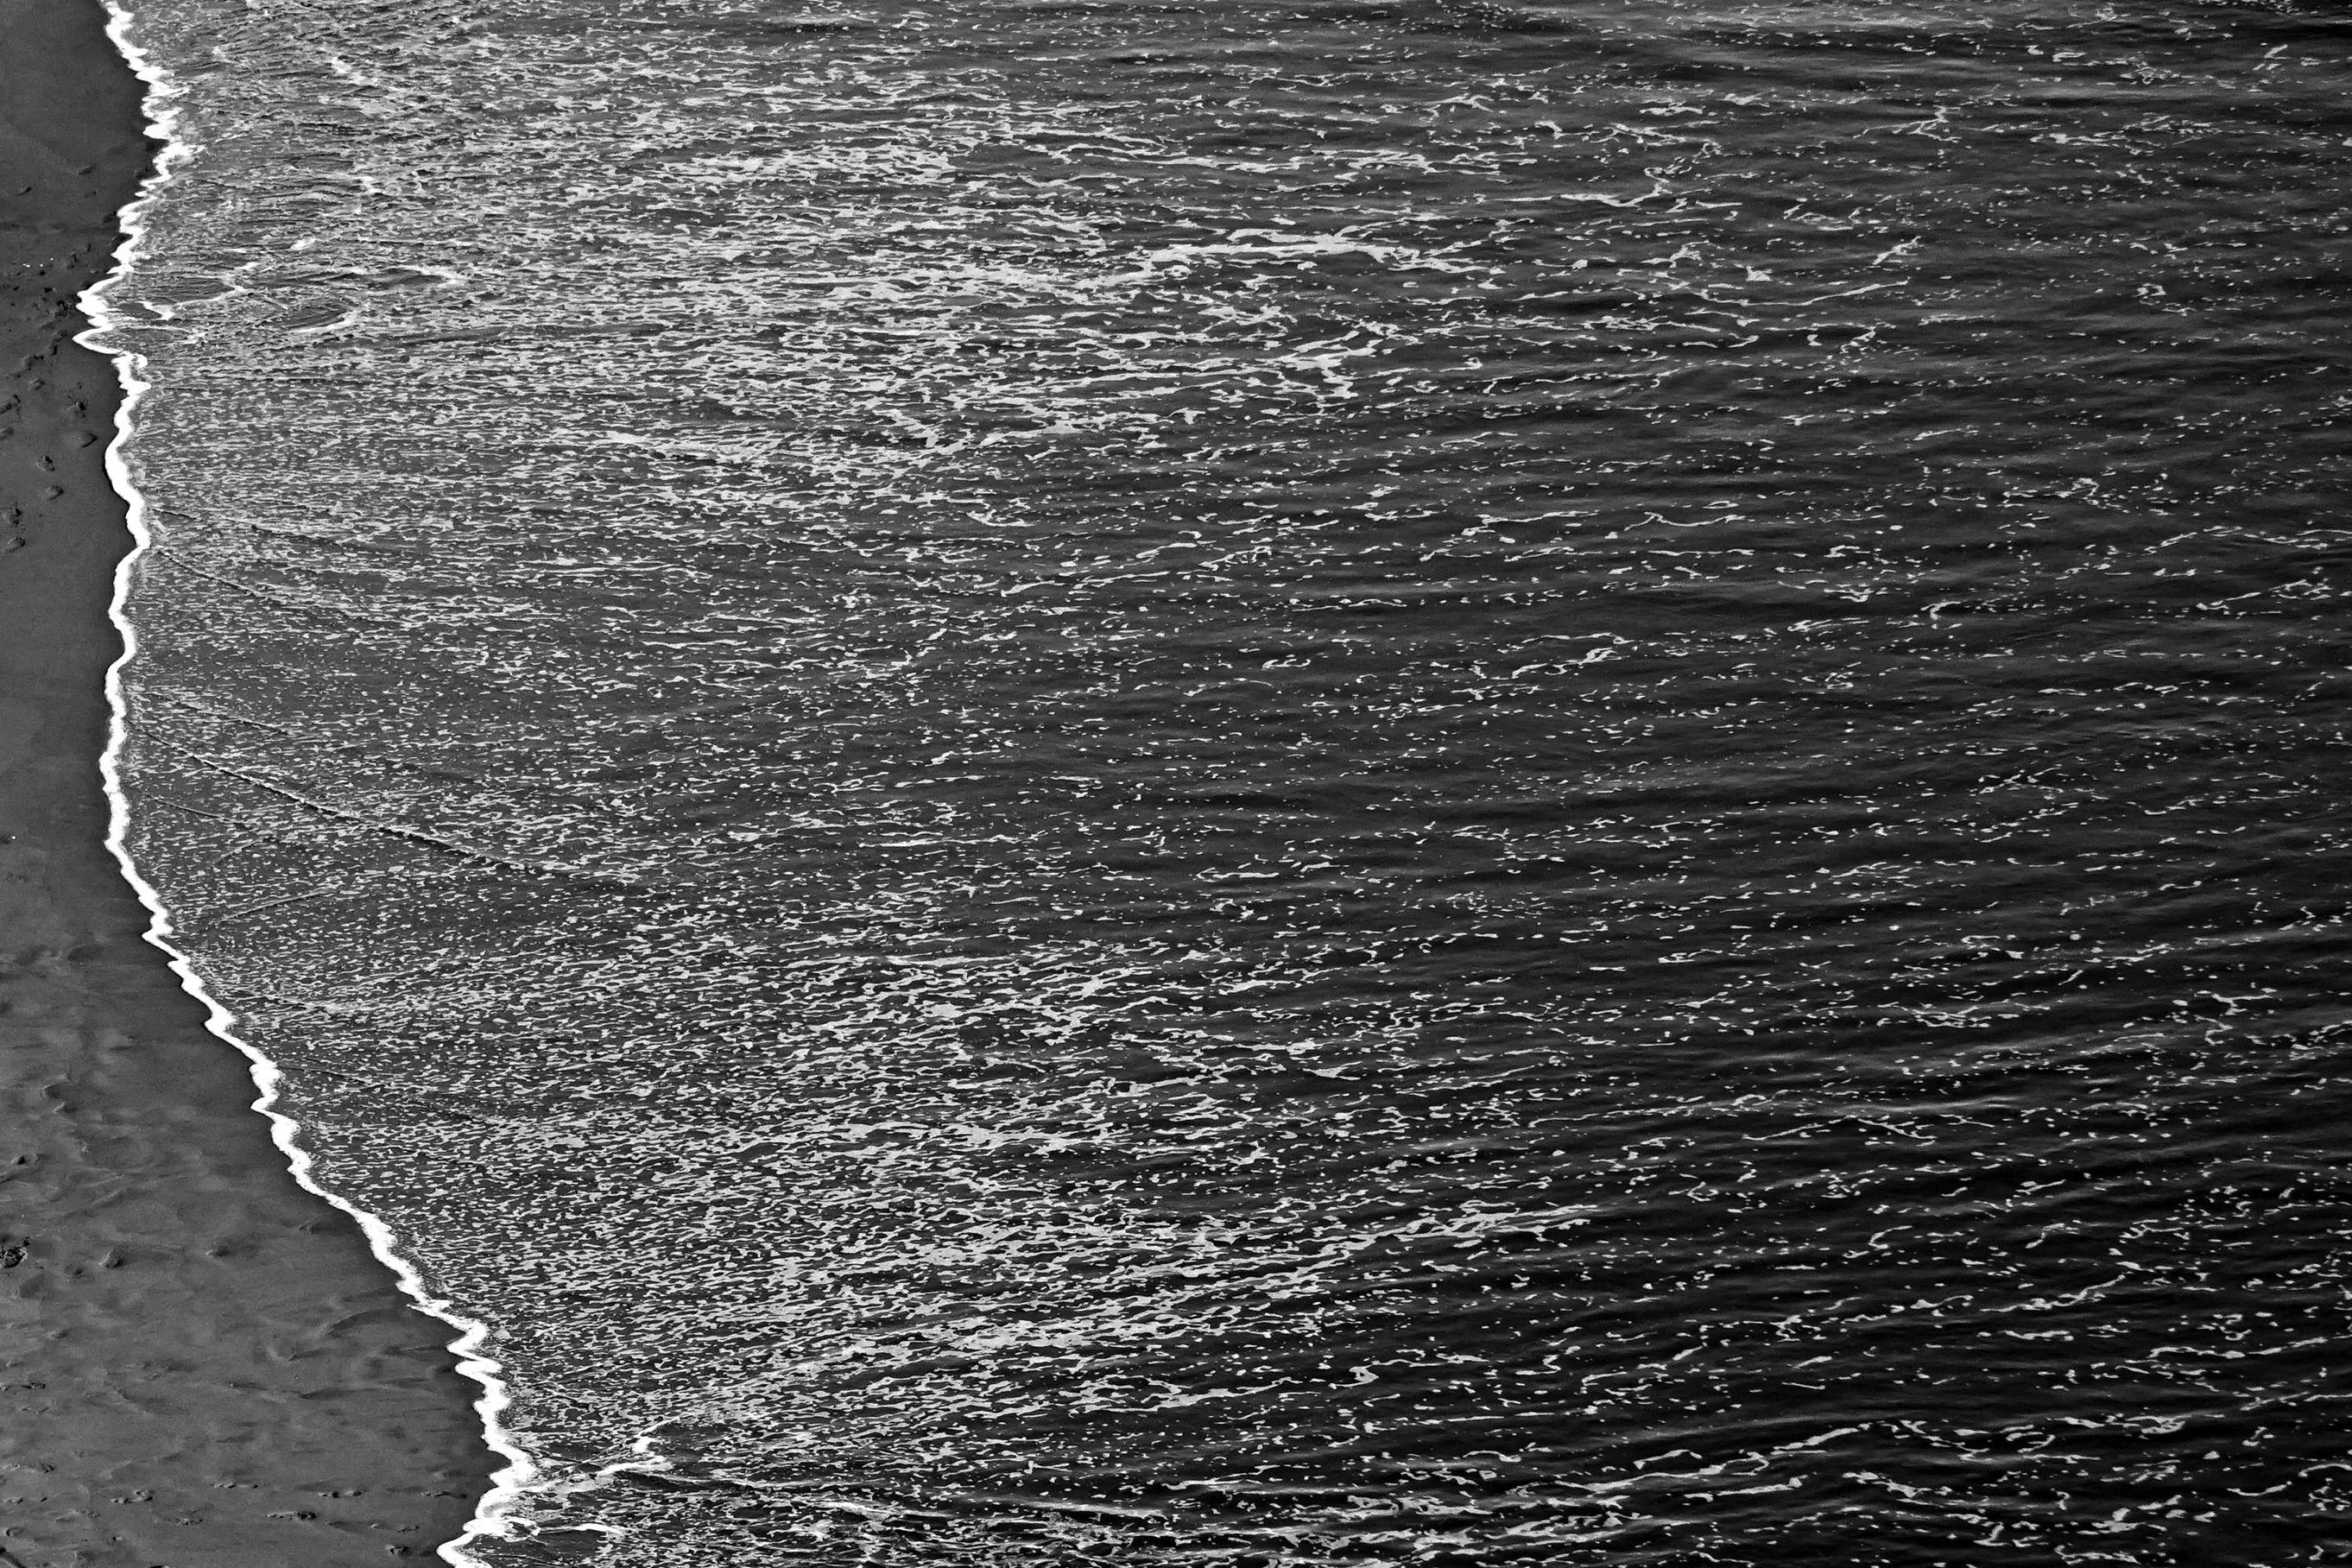 Calm Costa Rica Shore, Minimal Large Black and White Giclée Photograph Seascape For Sale 3